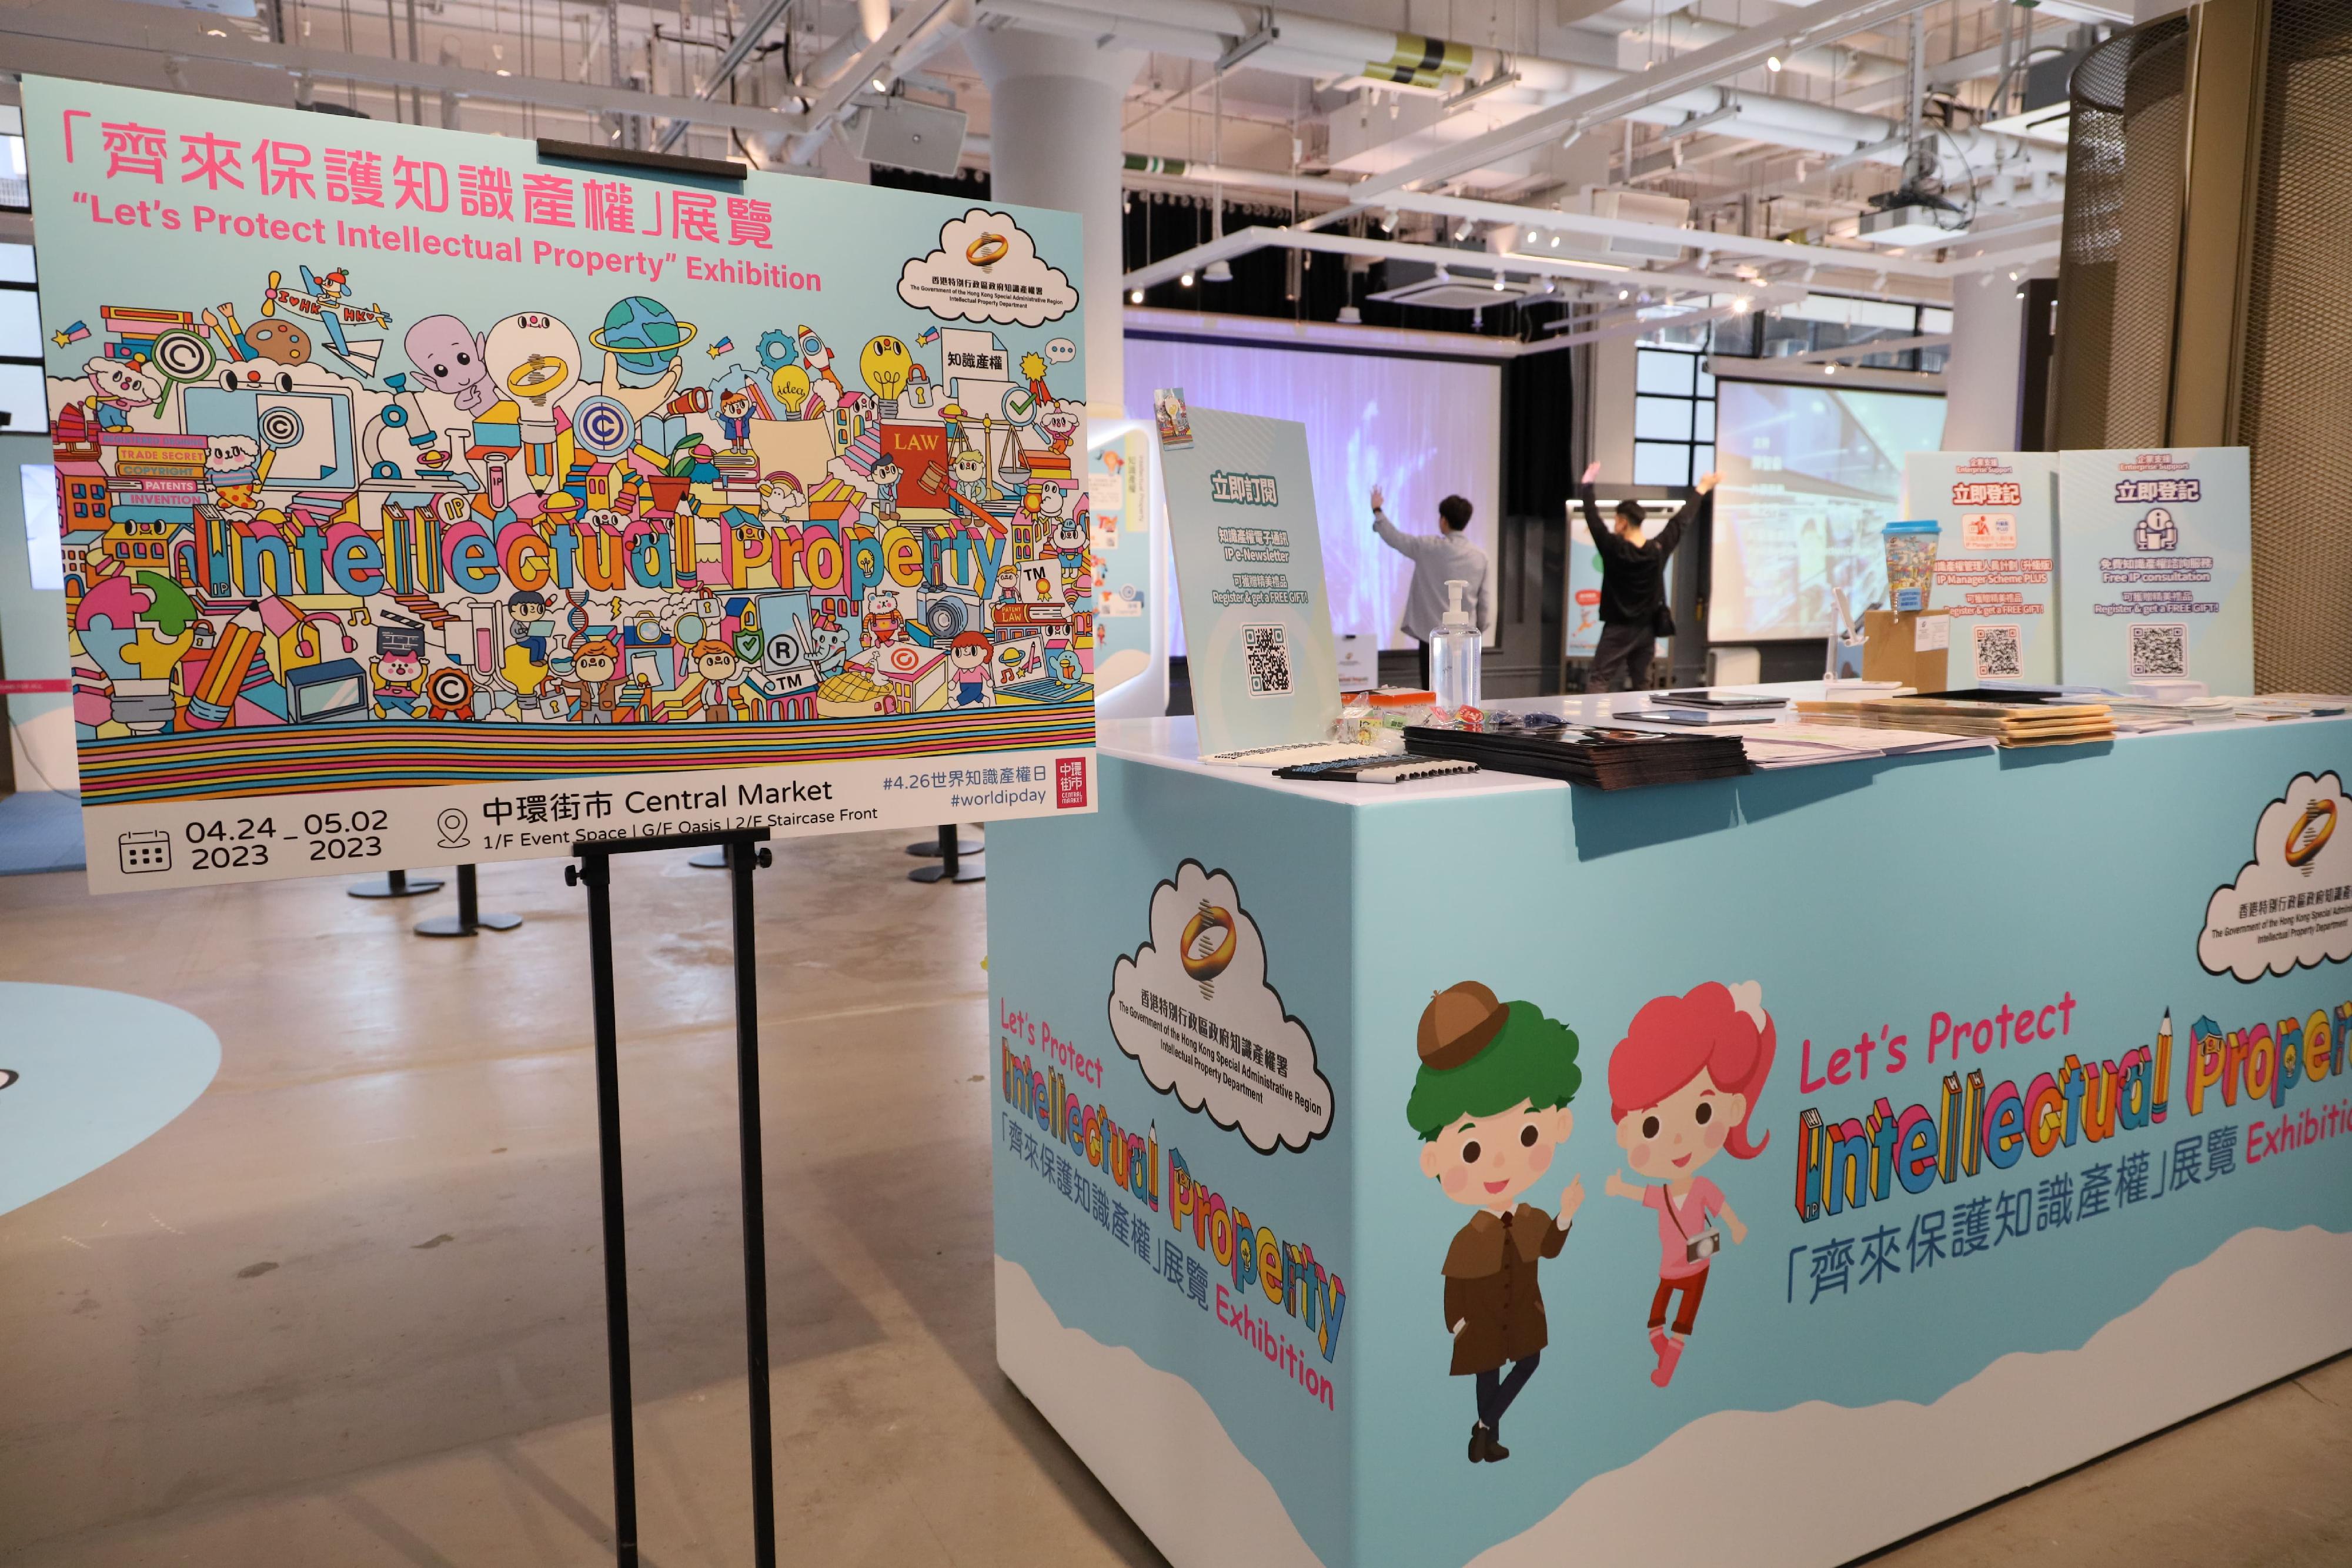 The Intellectual Property Department is organising the "Let's Protect Intellectual Property" exhibition from today (April 24) to May 2 at the Central Market. In addition to thematic display boards on intellectual property rights, the exhibition also features fun-filled activities such as photo areas and virtual reality games.